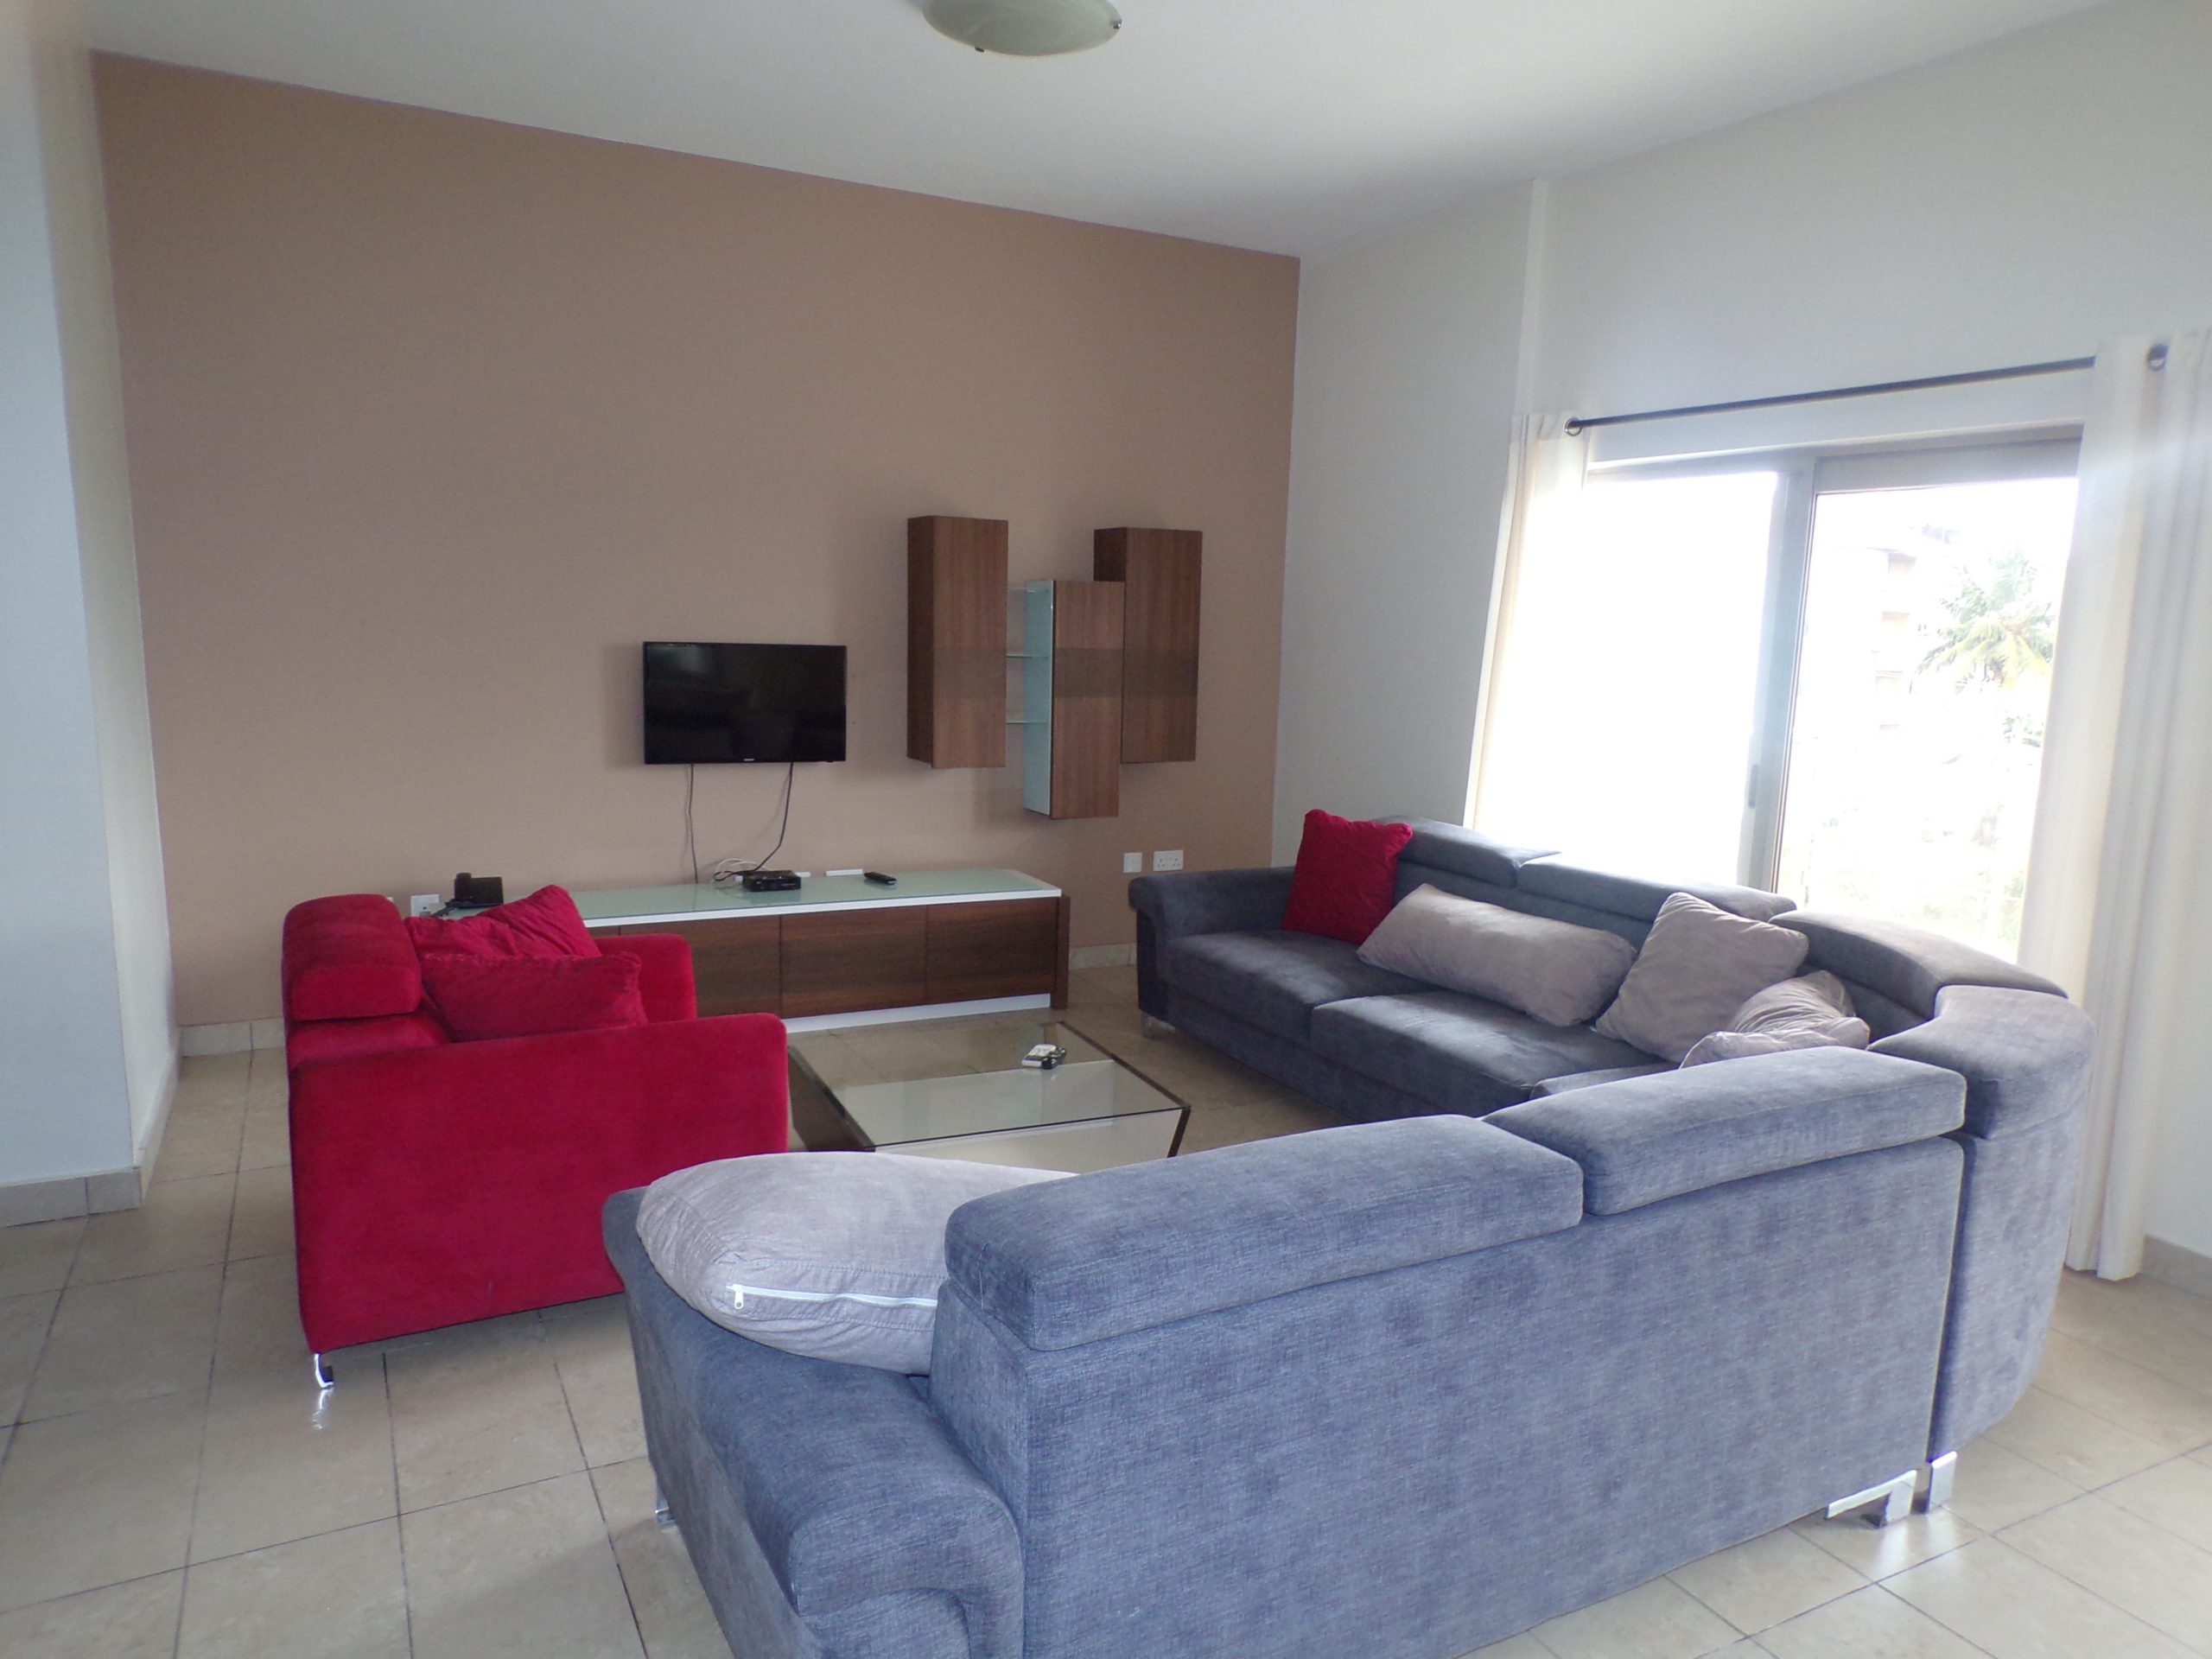 3 BEDROOM FURNISHED APARTMENT FOR RENT AT AIRPORT RESIDENTIAL